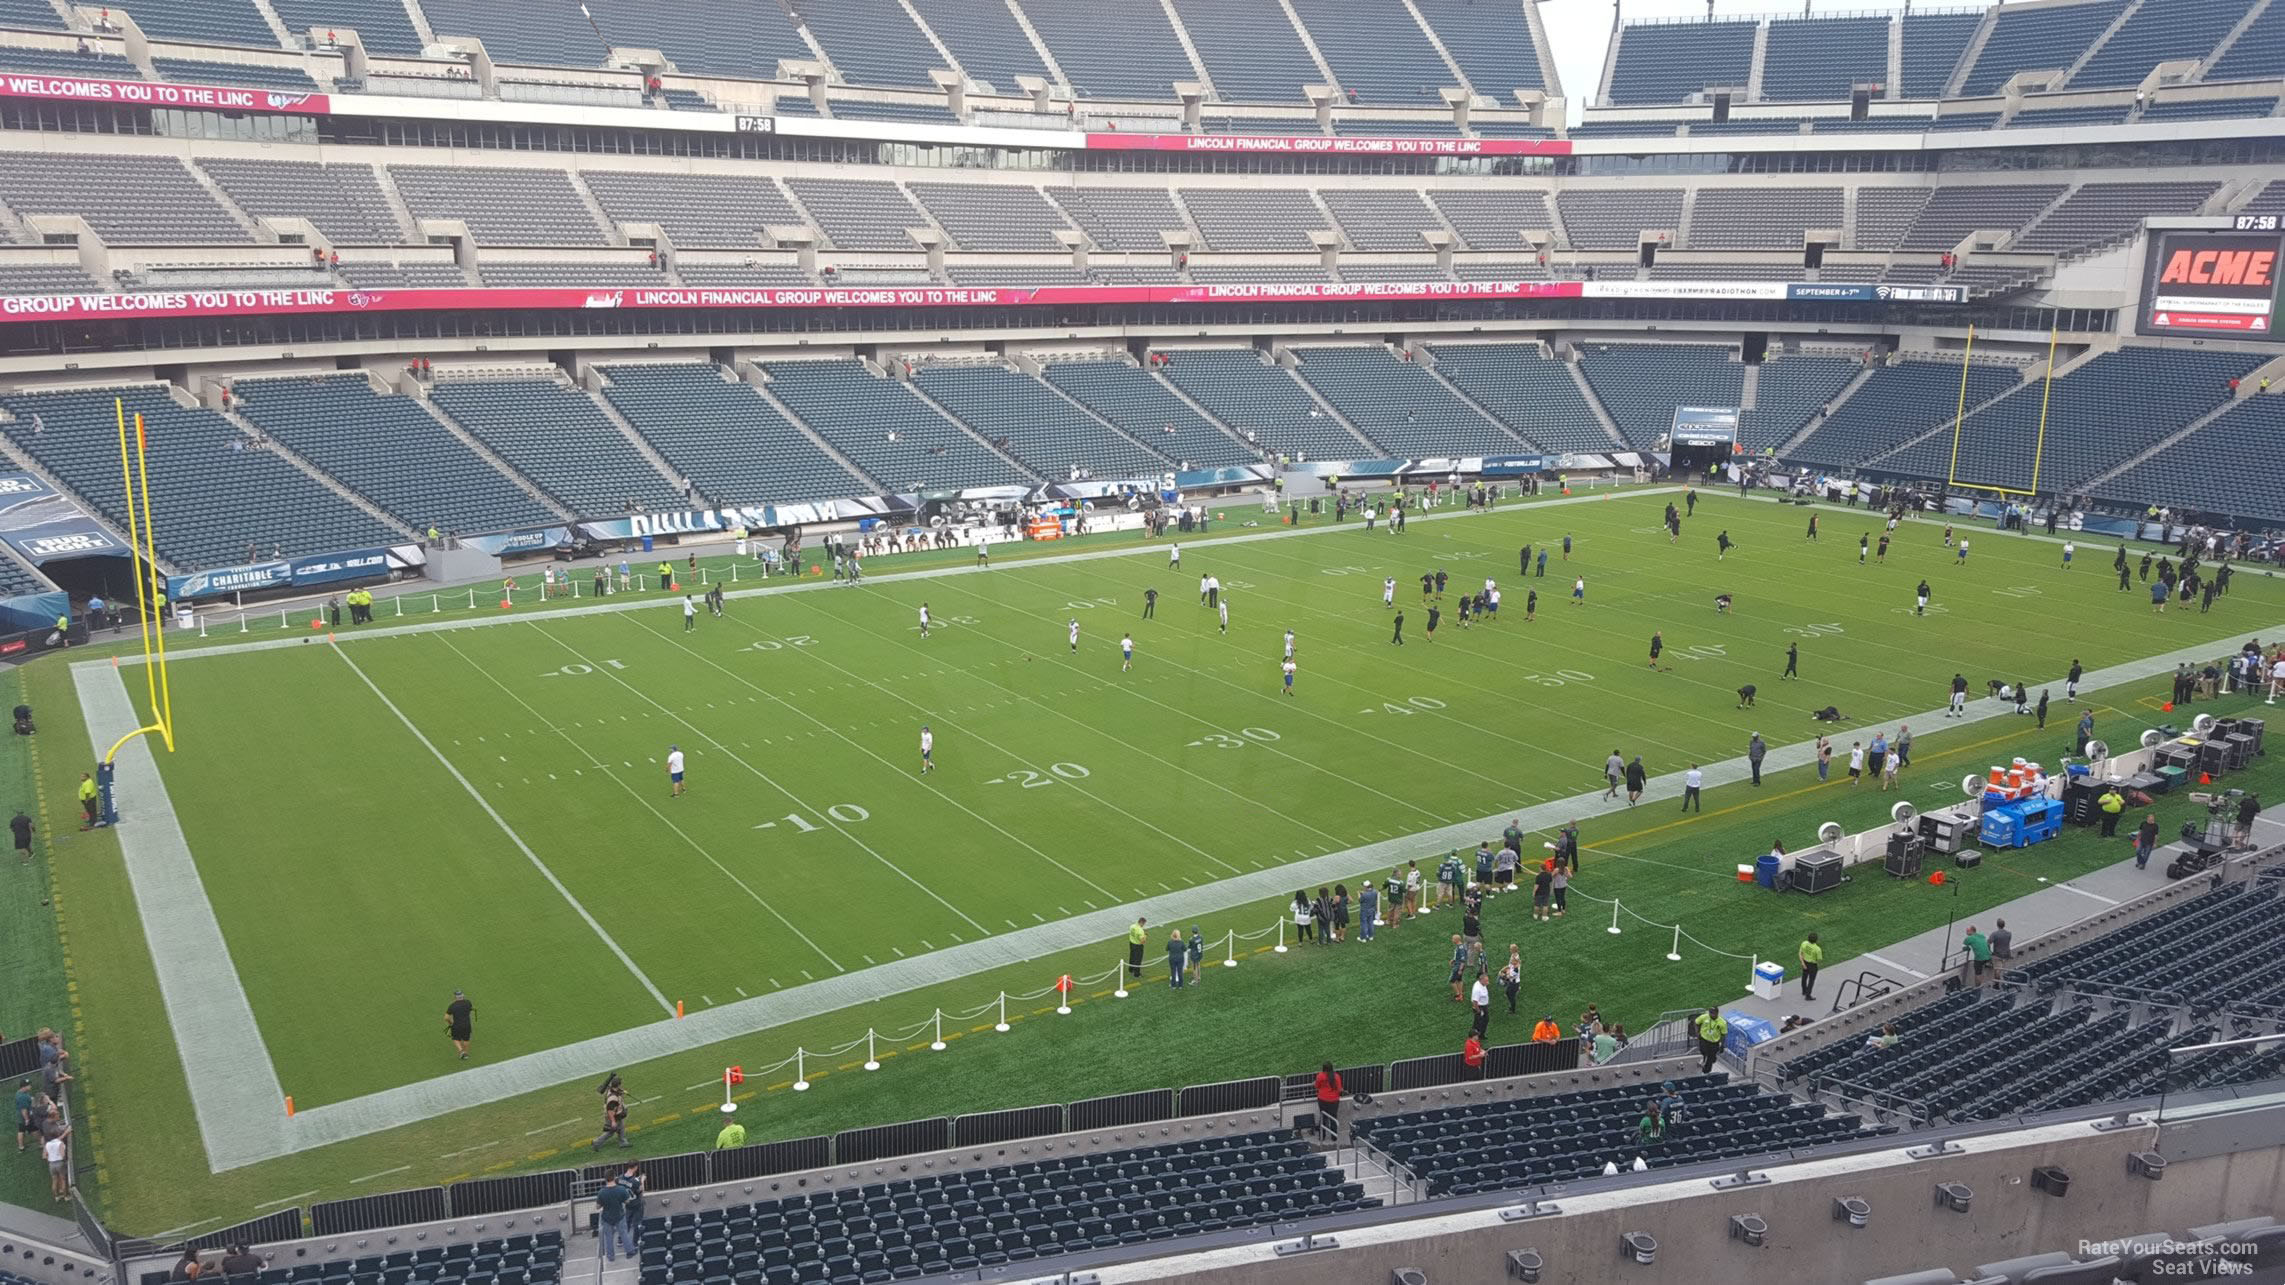 section c36, row 7 seat view  for football - lincoln financial field